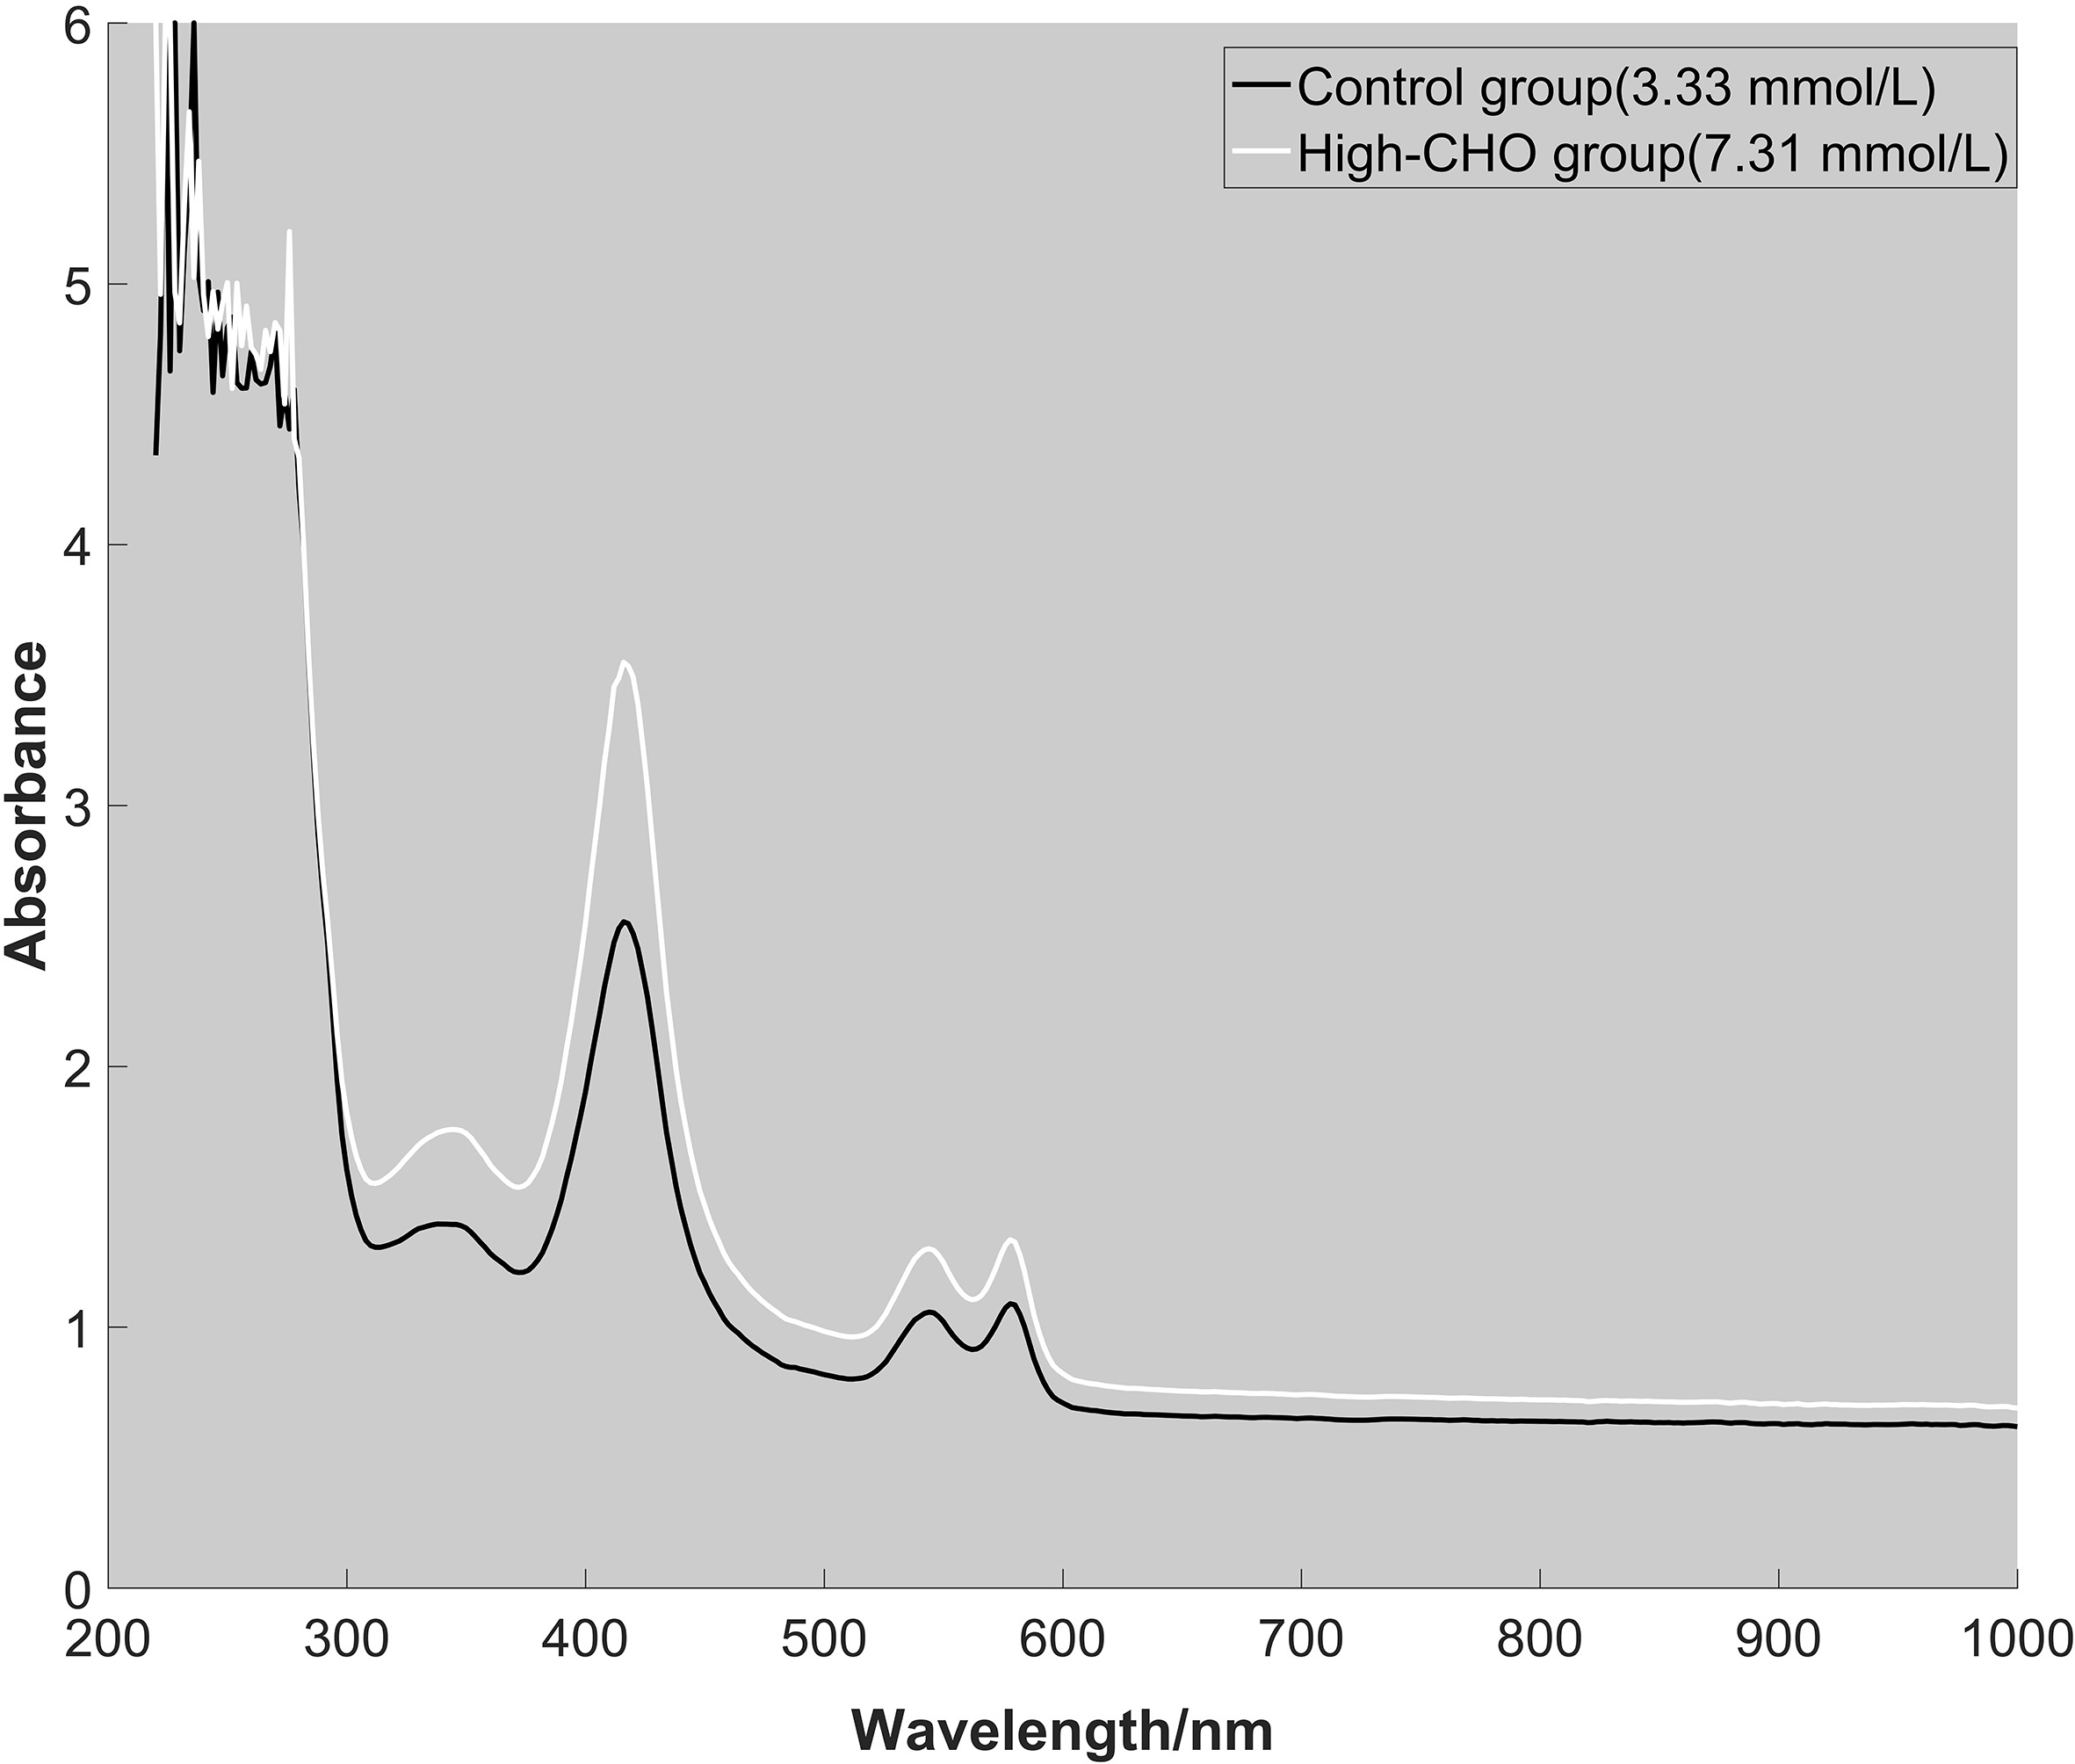 The absorption spectra of two whole blood samples from control group (CHO: 3.33 mmol/L) and high-CHO group (CHO: 7.31 mmol/L).